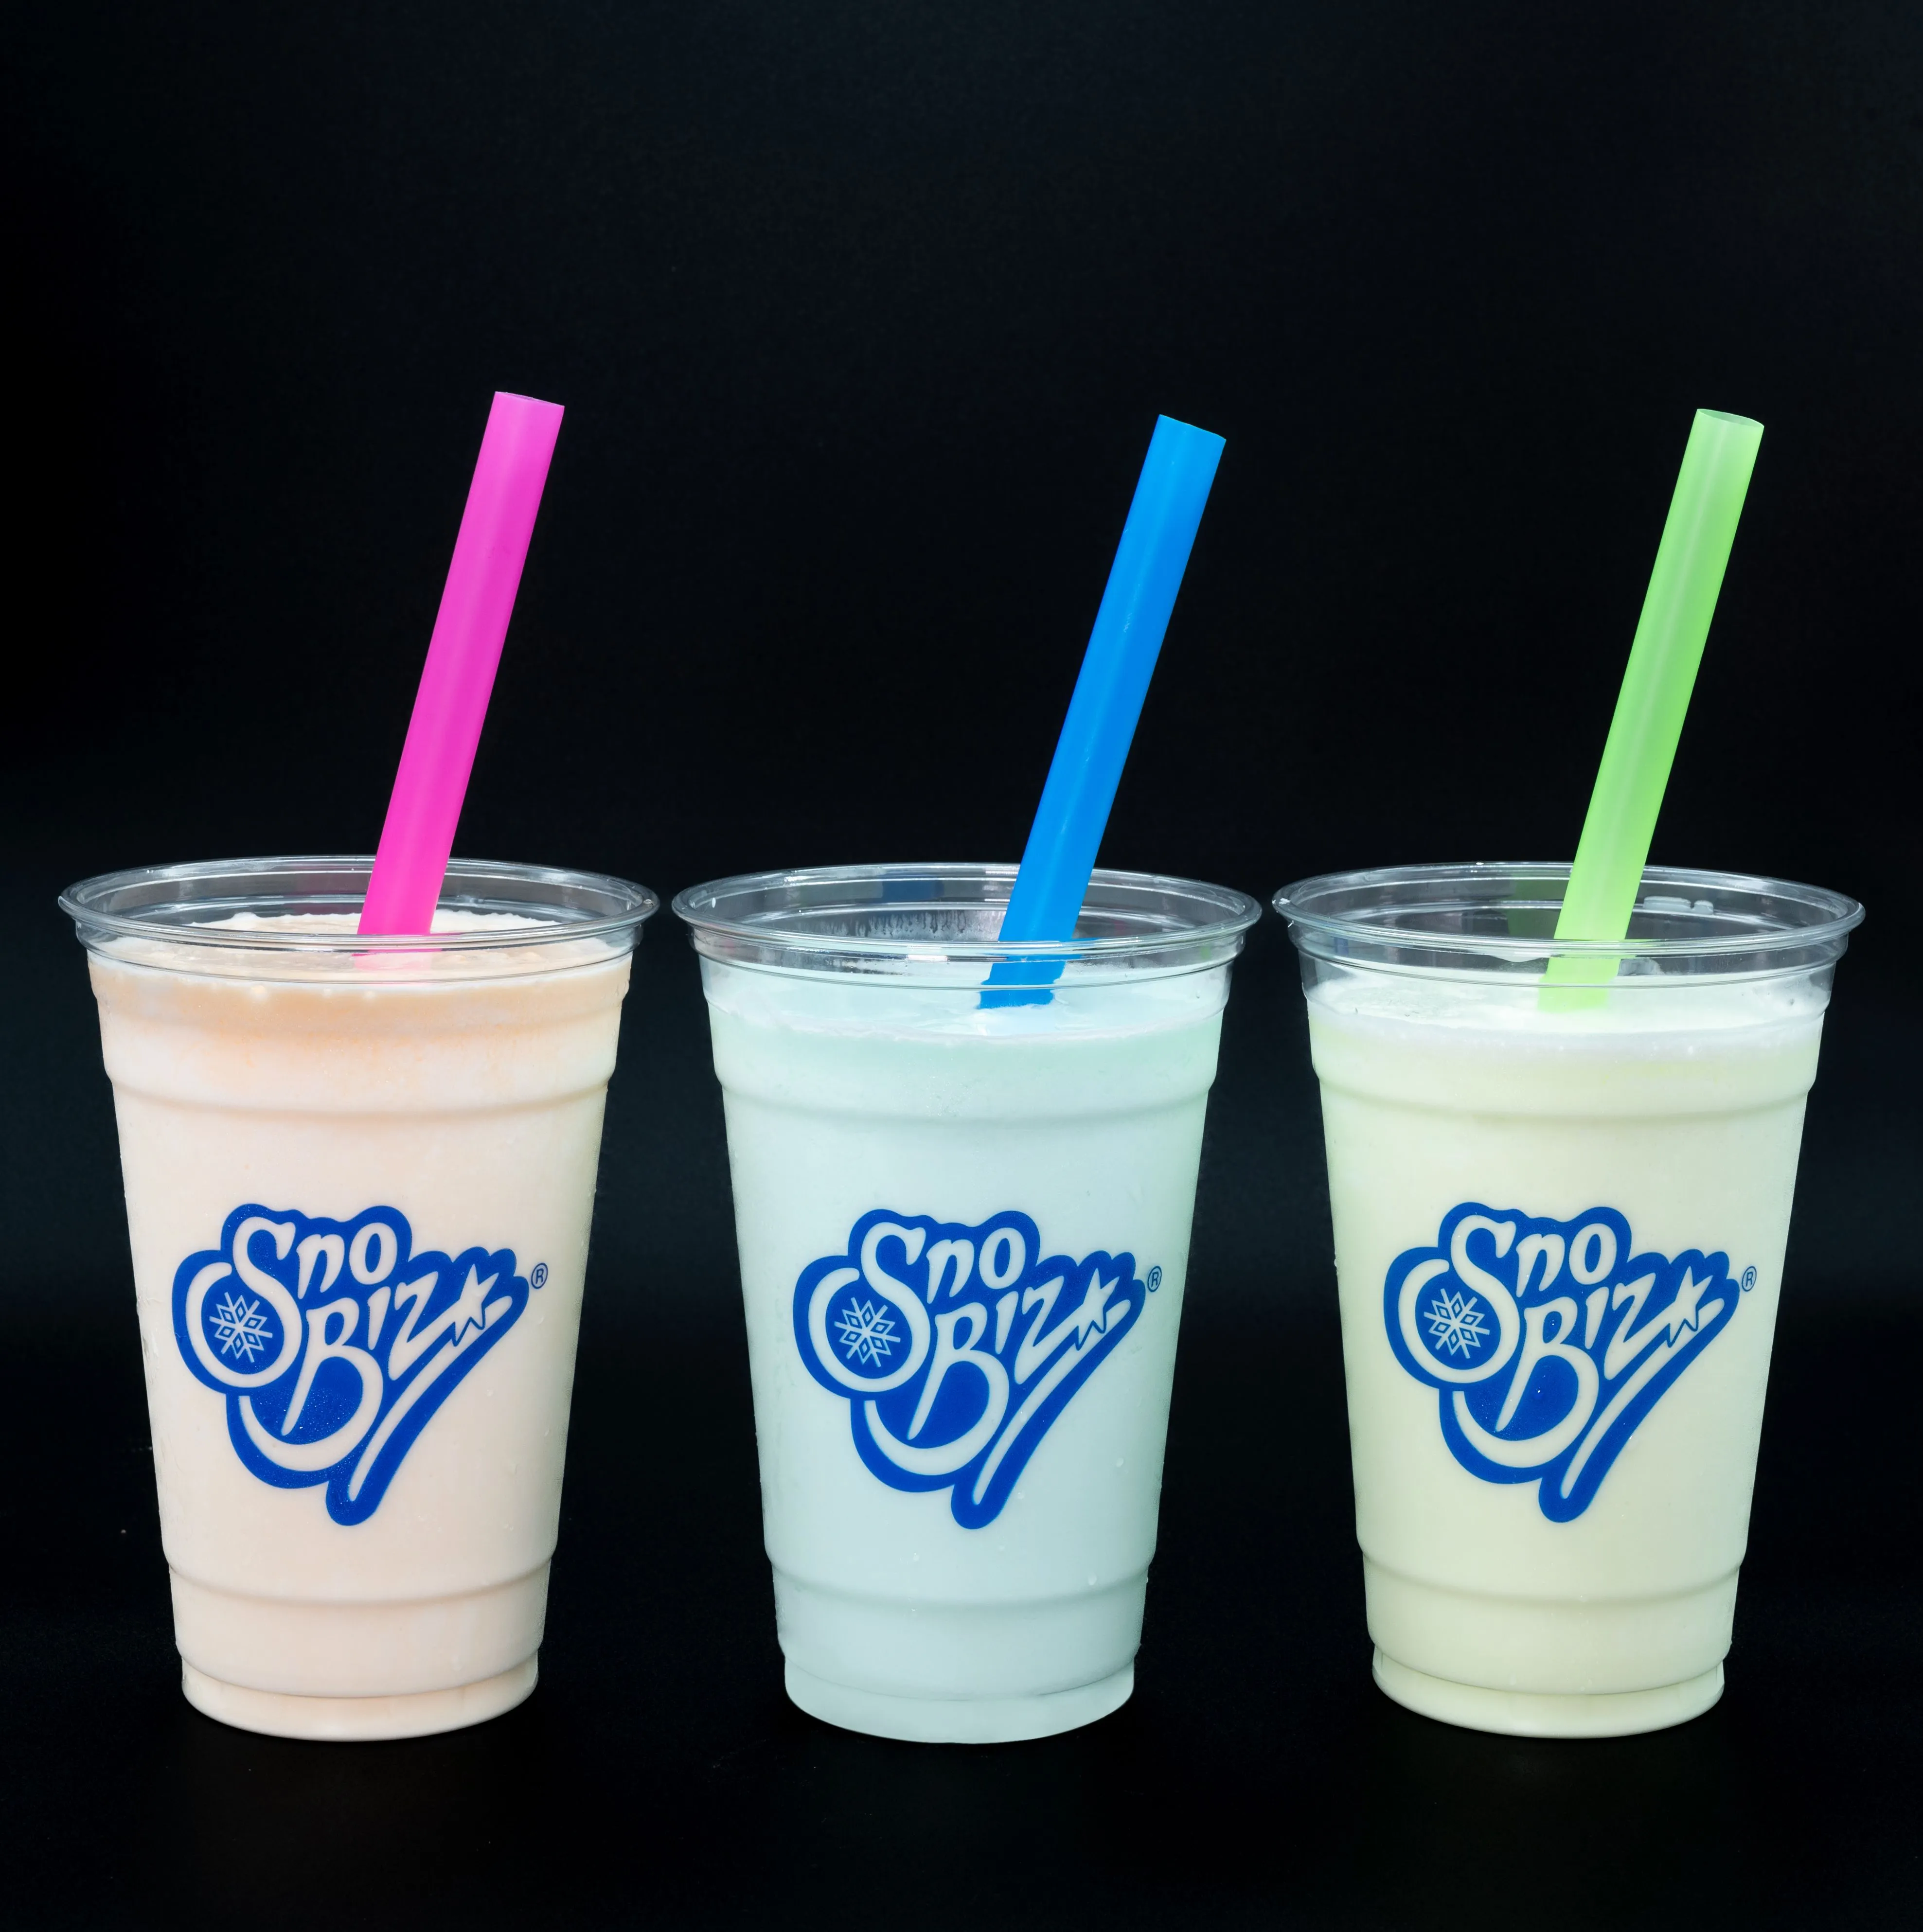 Three cups of frozen beverages with pink, blue, and green straws on a black background with "Sno Biz" logos.